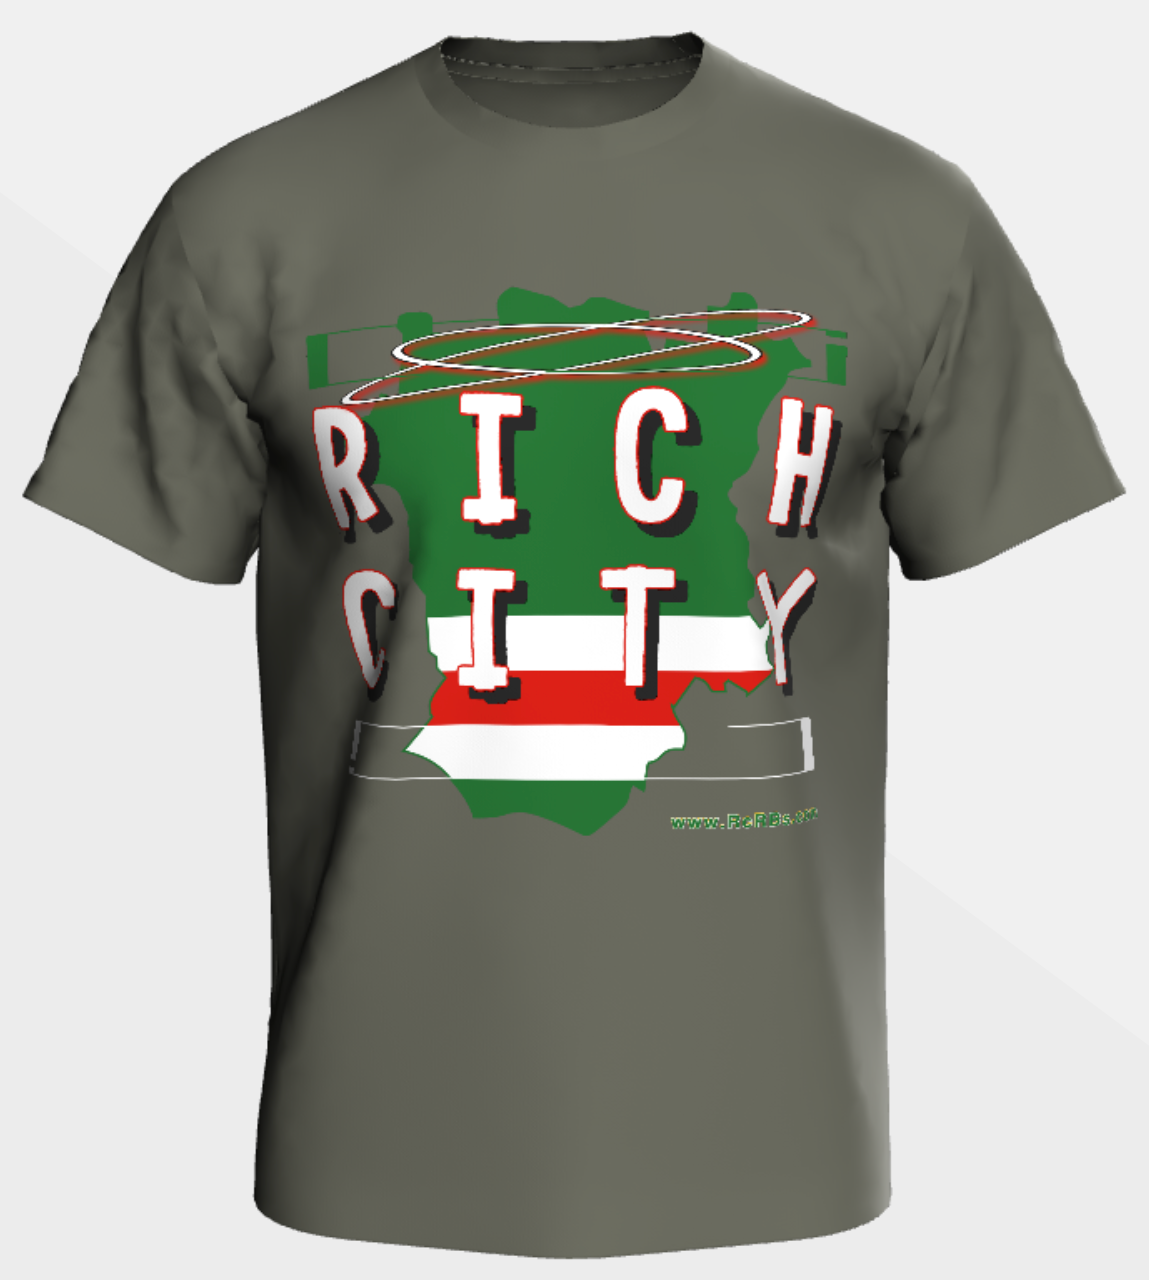 New 2023 RichCity Rides Bike/Skate Cooperative -"Chechen Republic"- Sustainable Clothing Collection